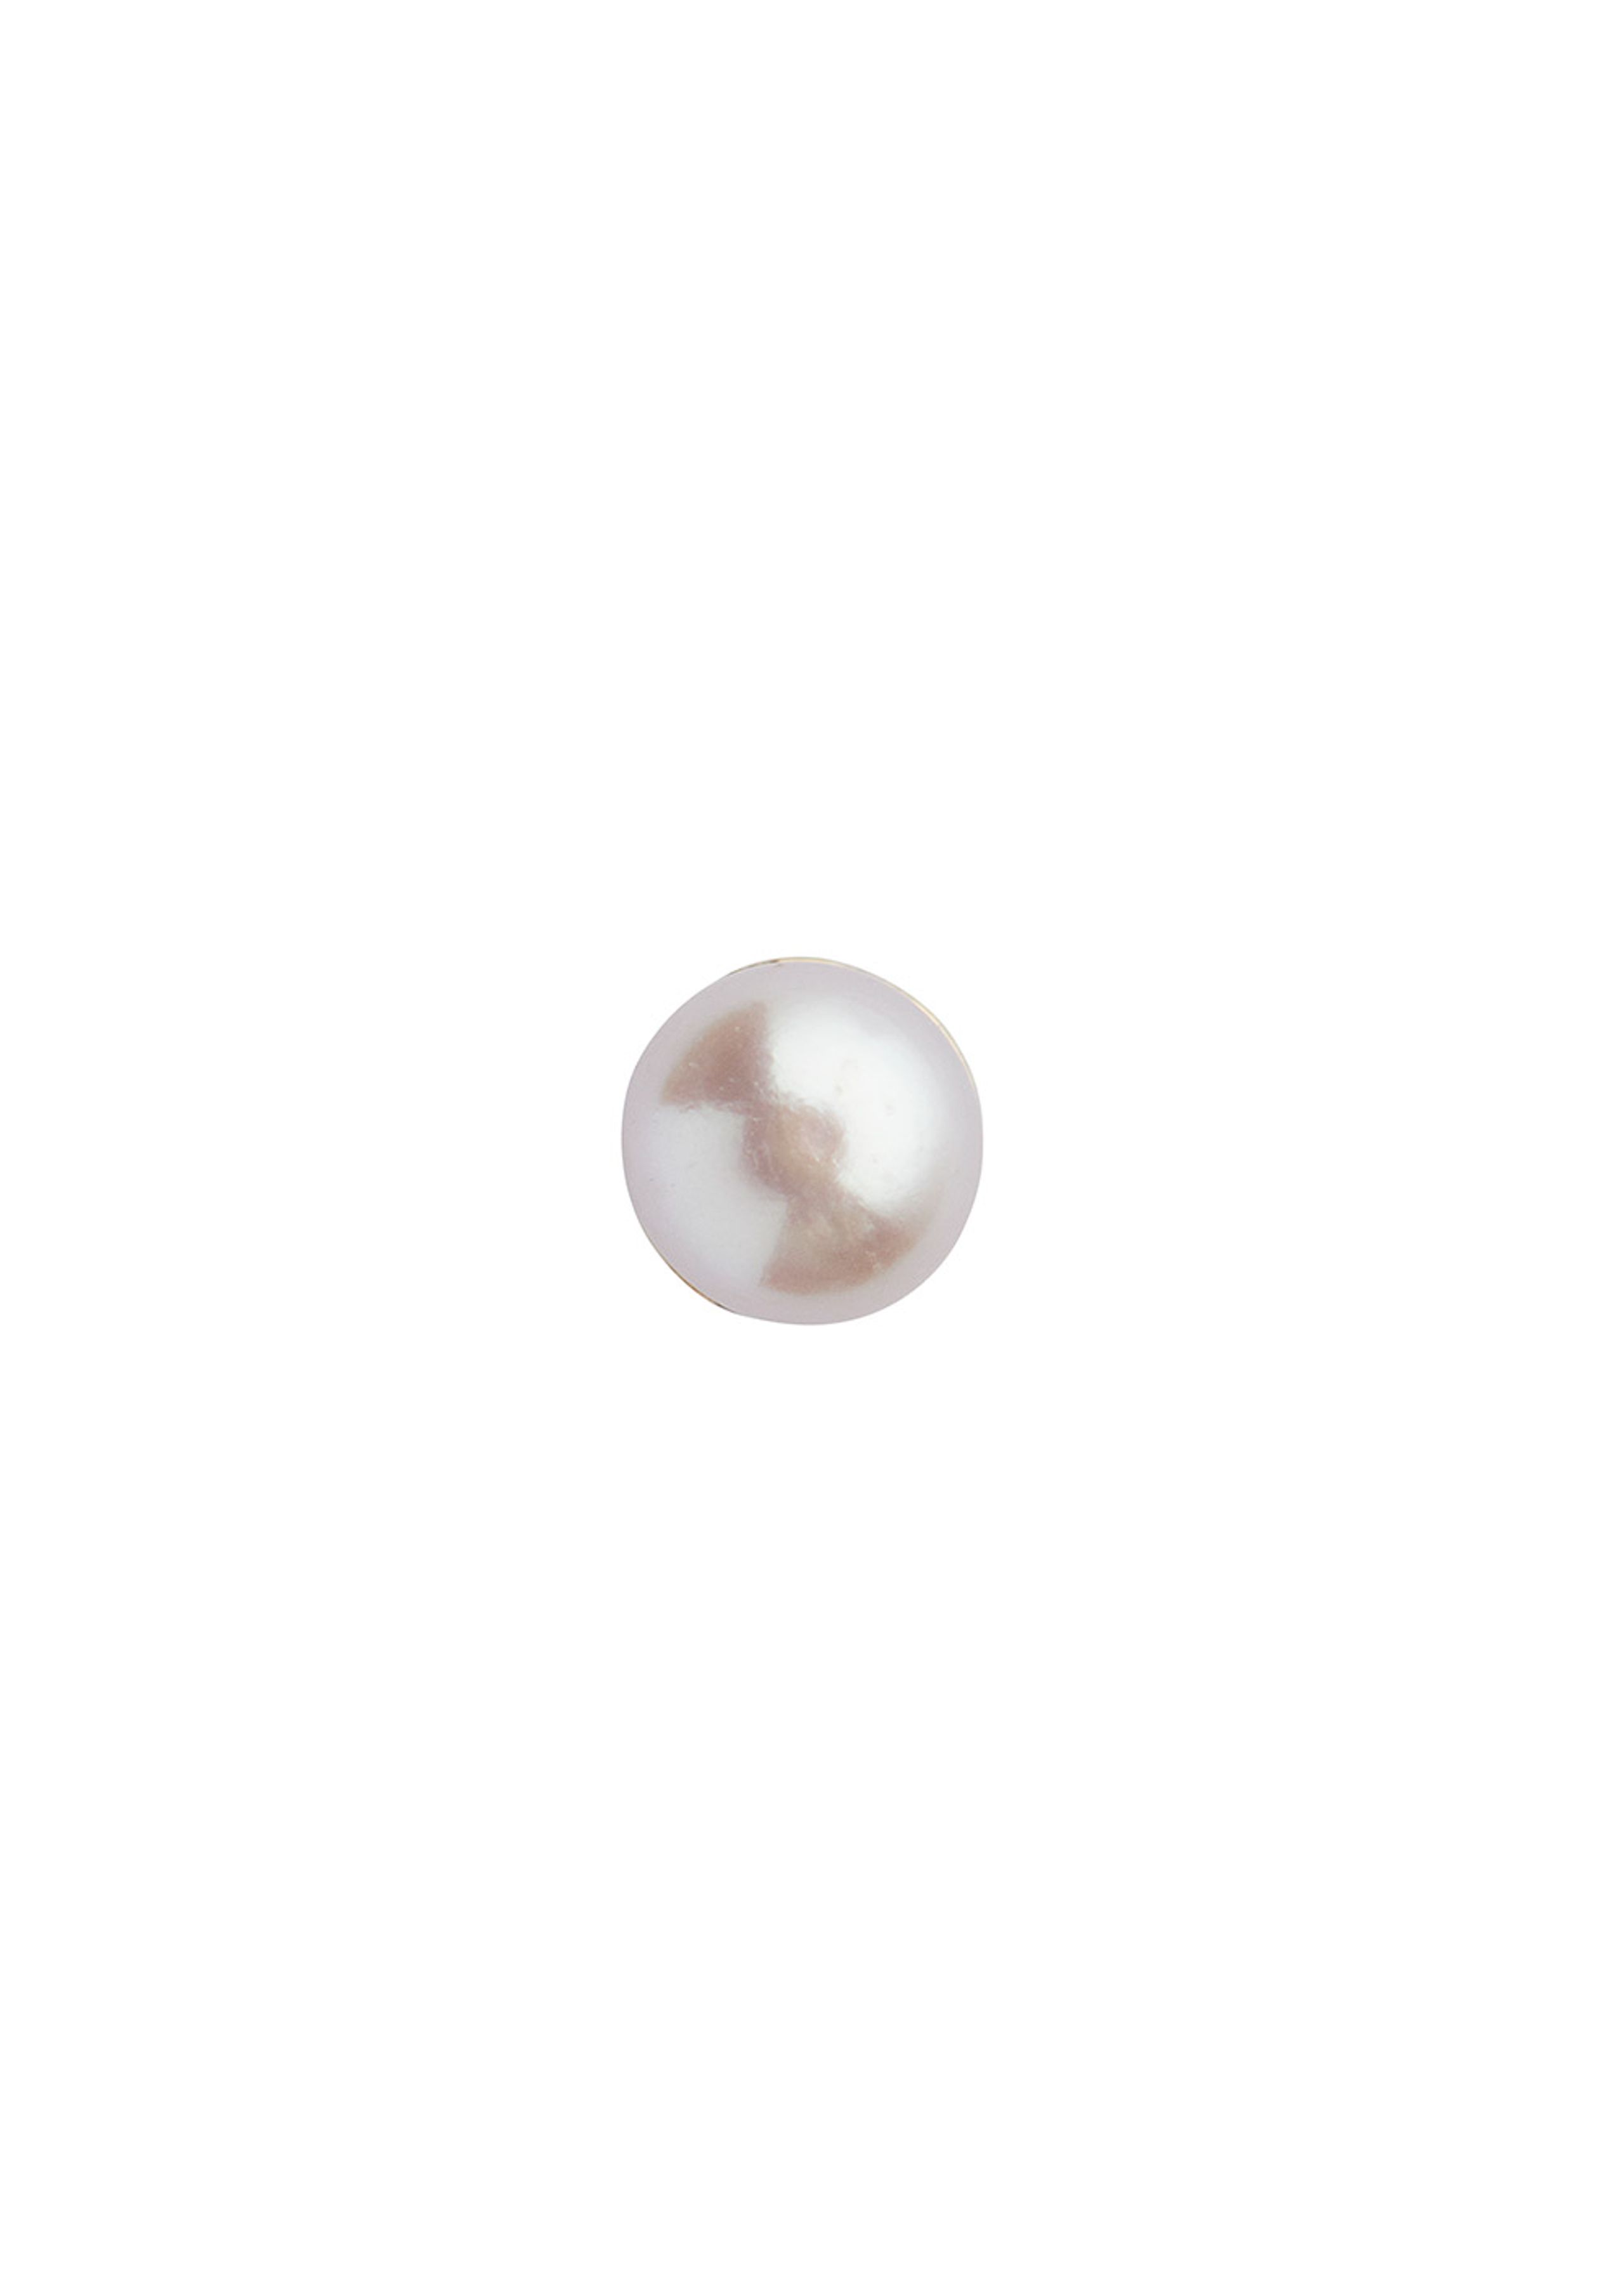 Stine A - Ørering - Tres Petit Pearl Earring - Gold